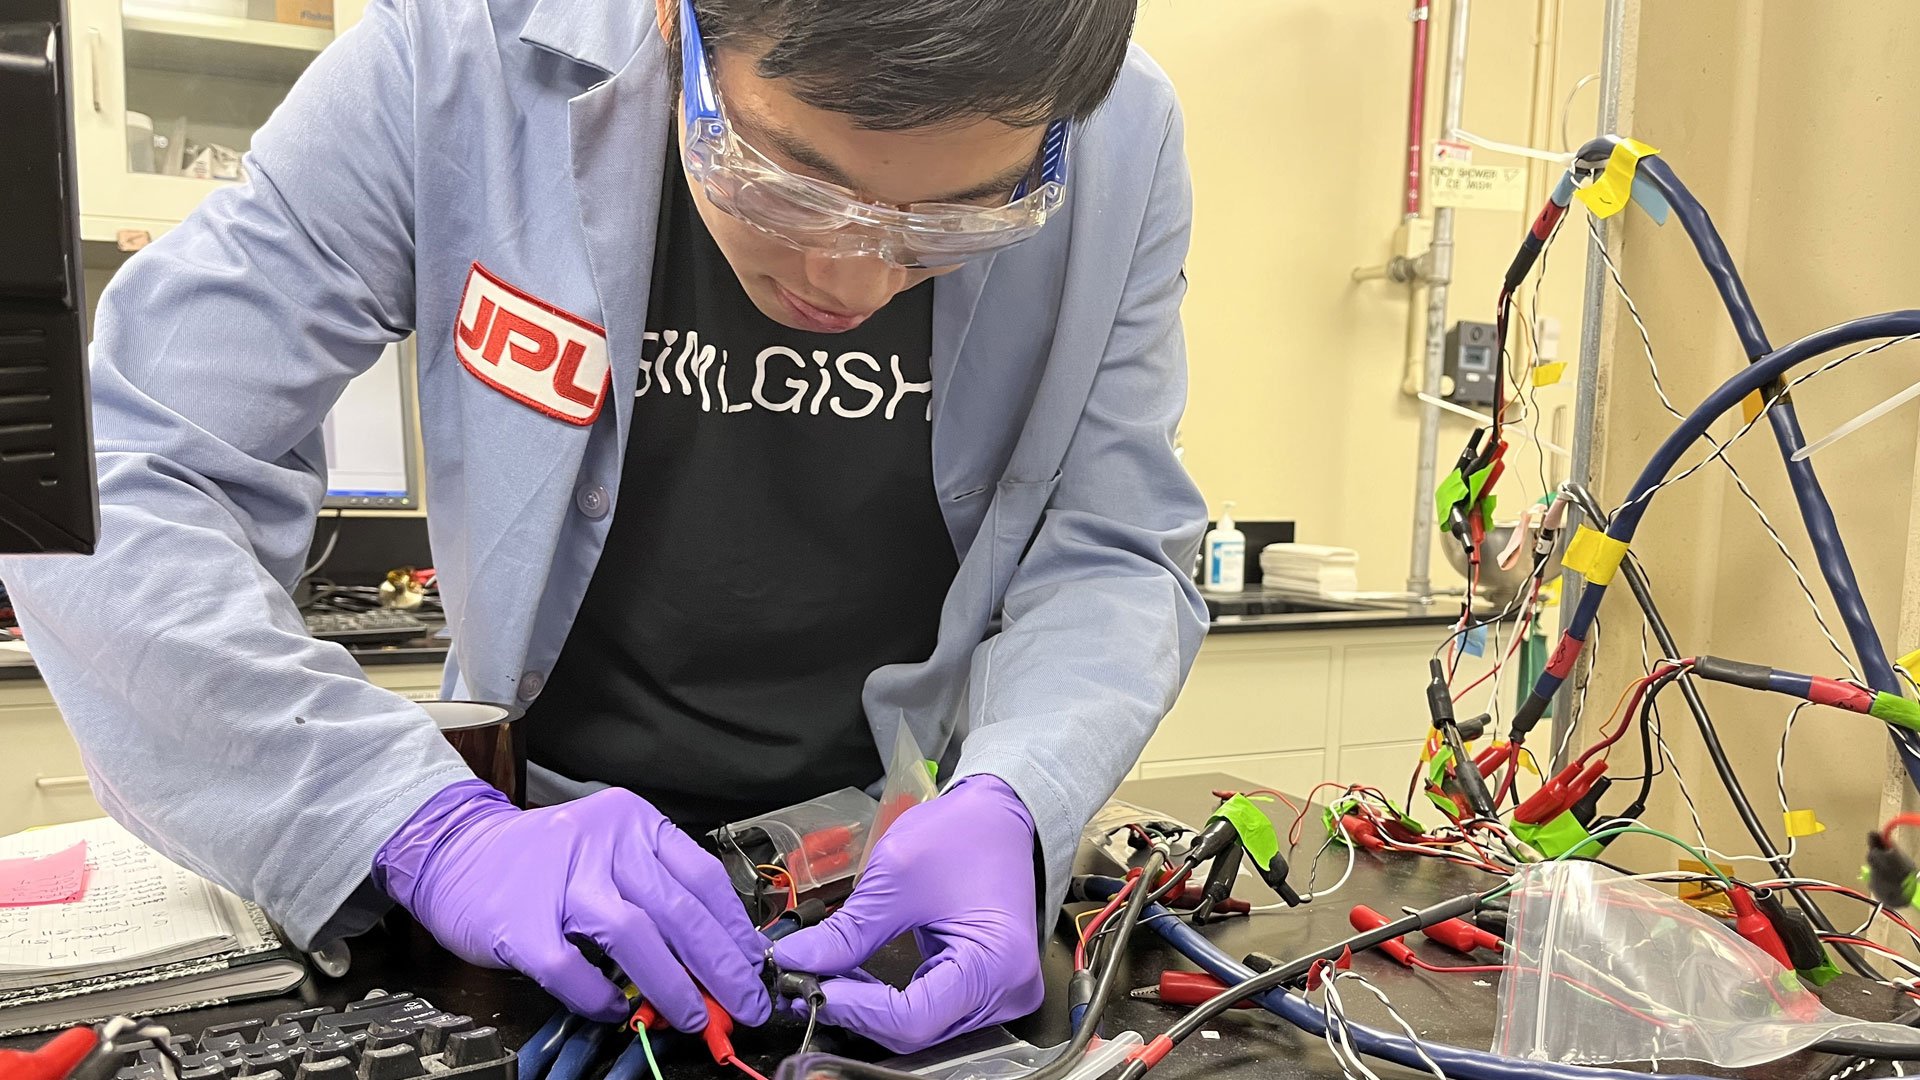 Wang wears lab goggles, a blue labcoat with a JPL patch, and purple surgical gloves and holds wires extending from a web of wires festooned with electrical tape.